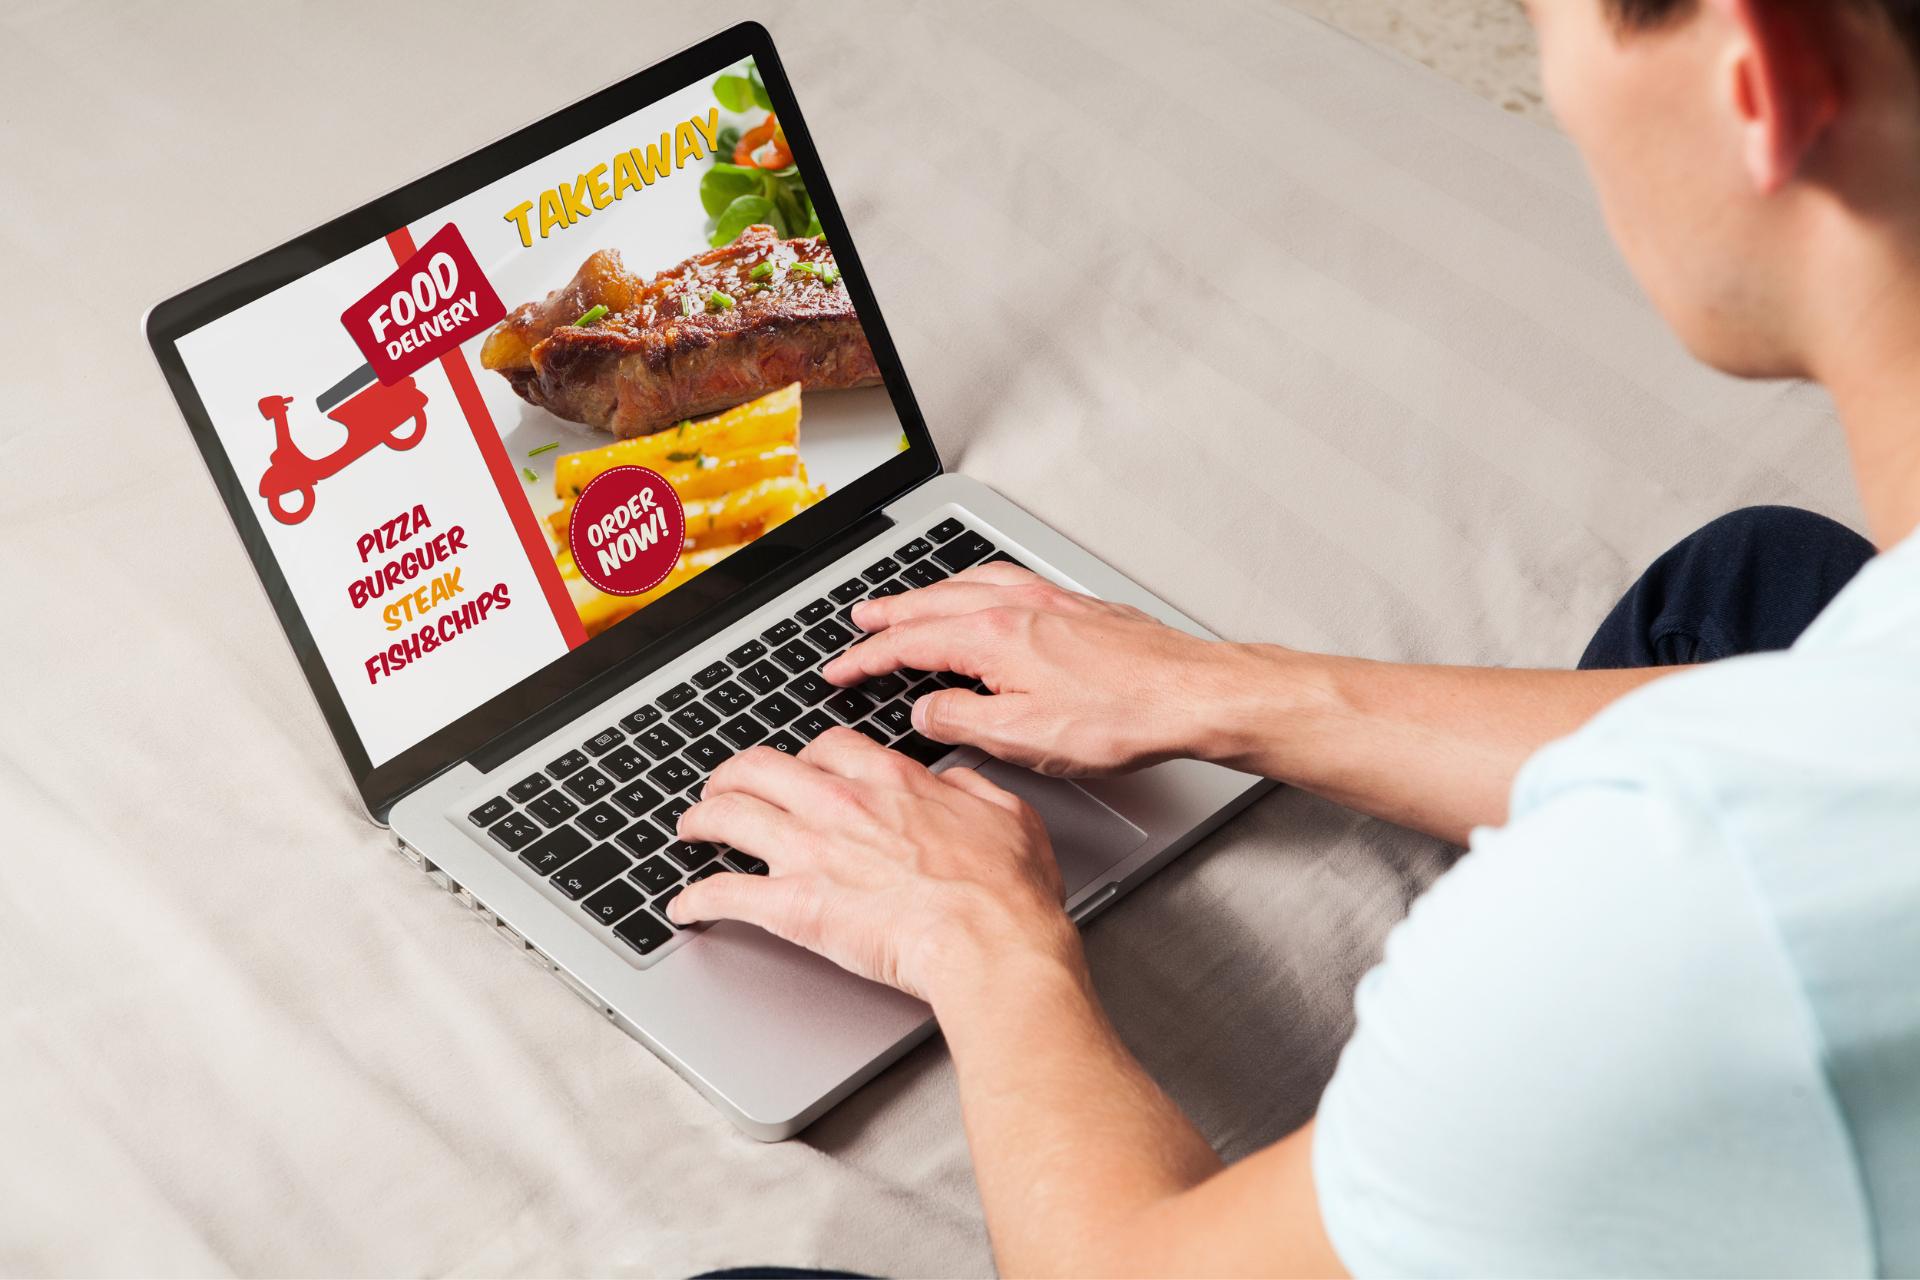 restaurant websites give you full control and allow you to take your profits back